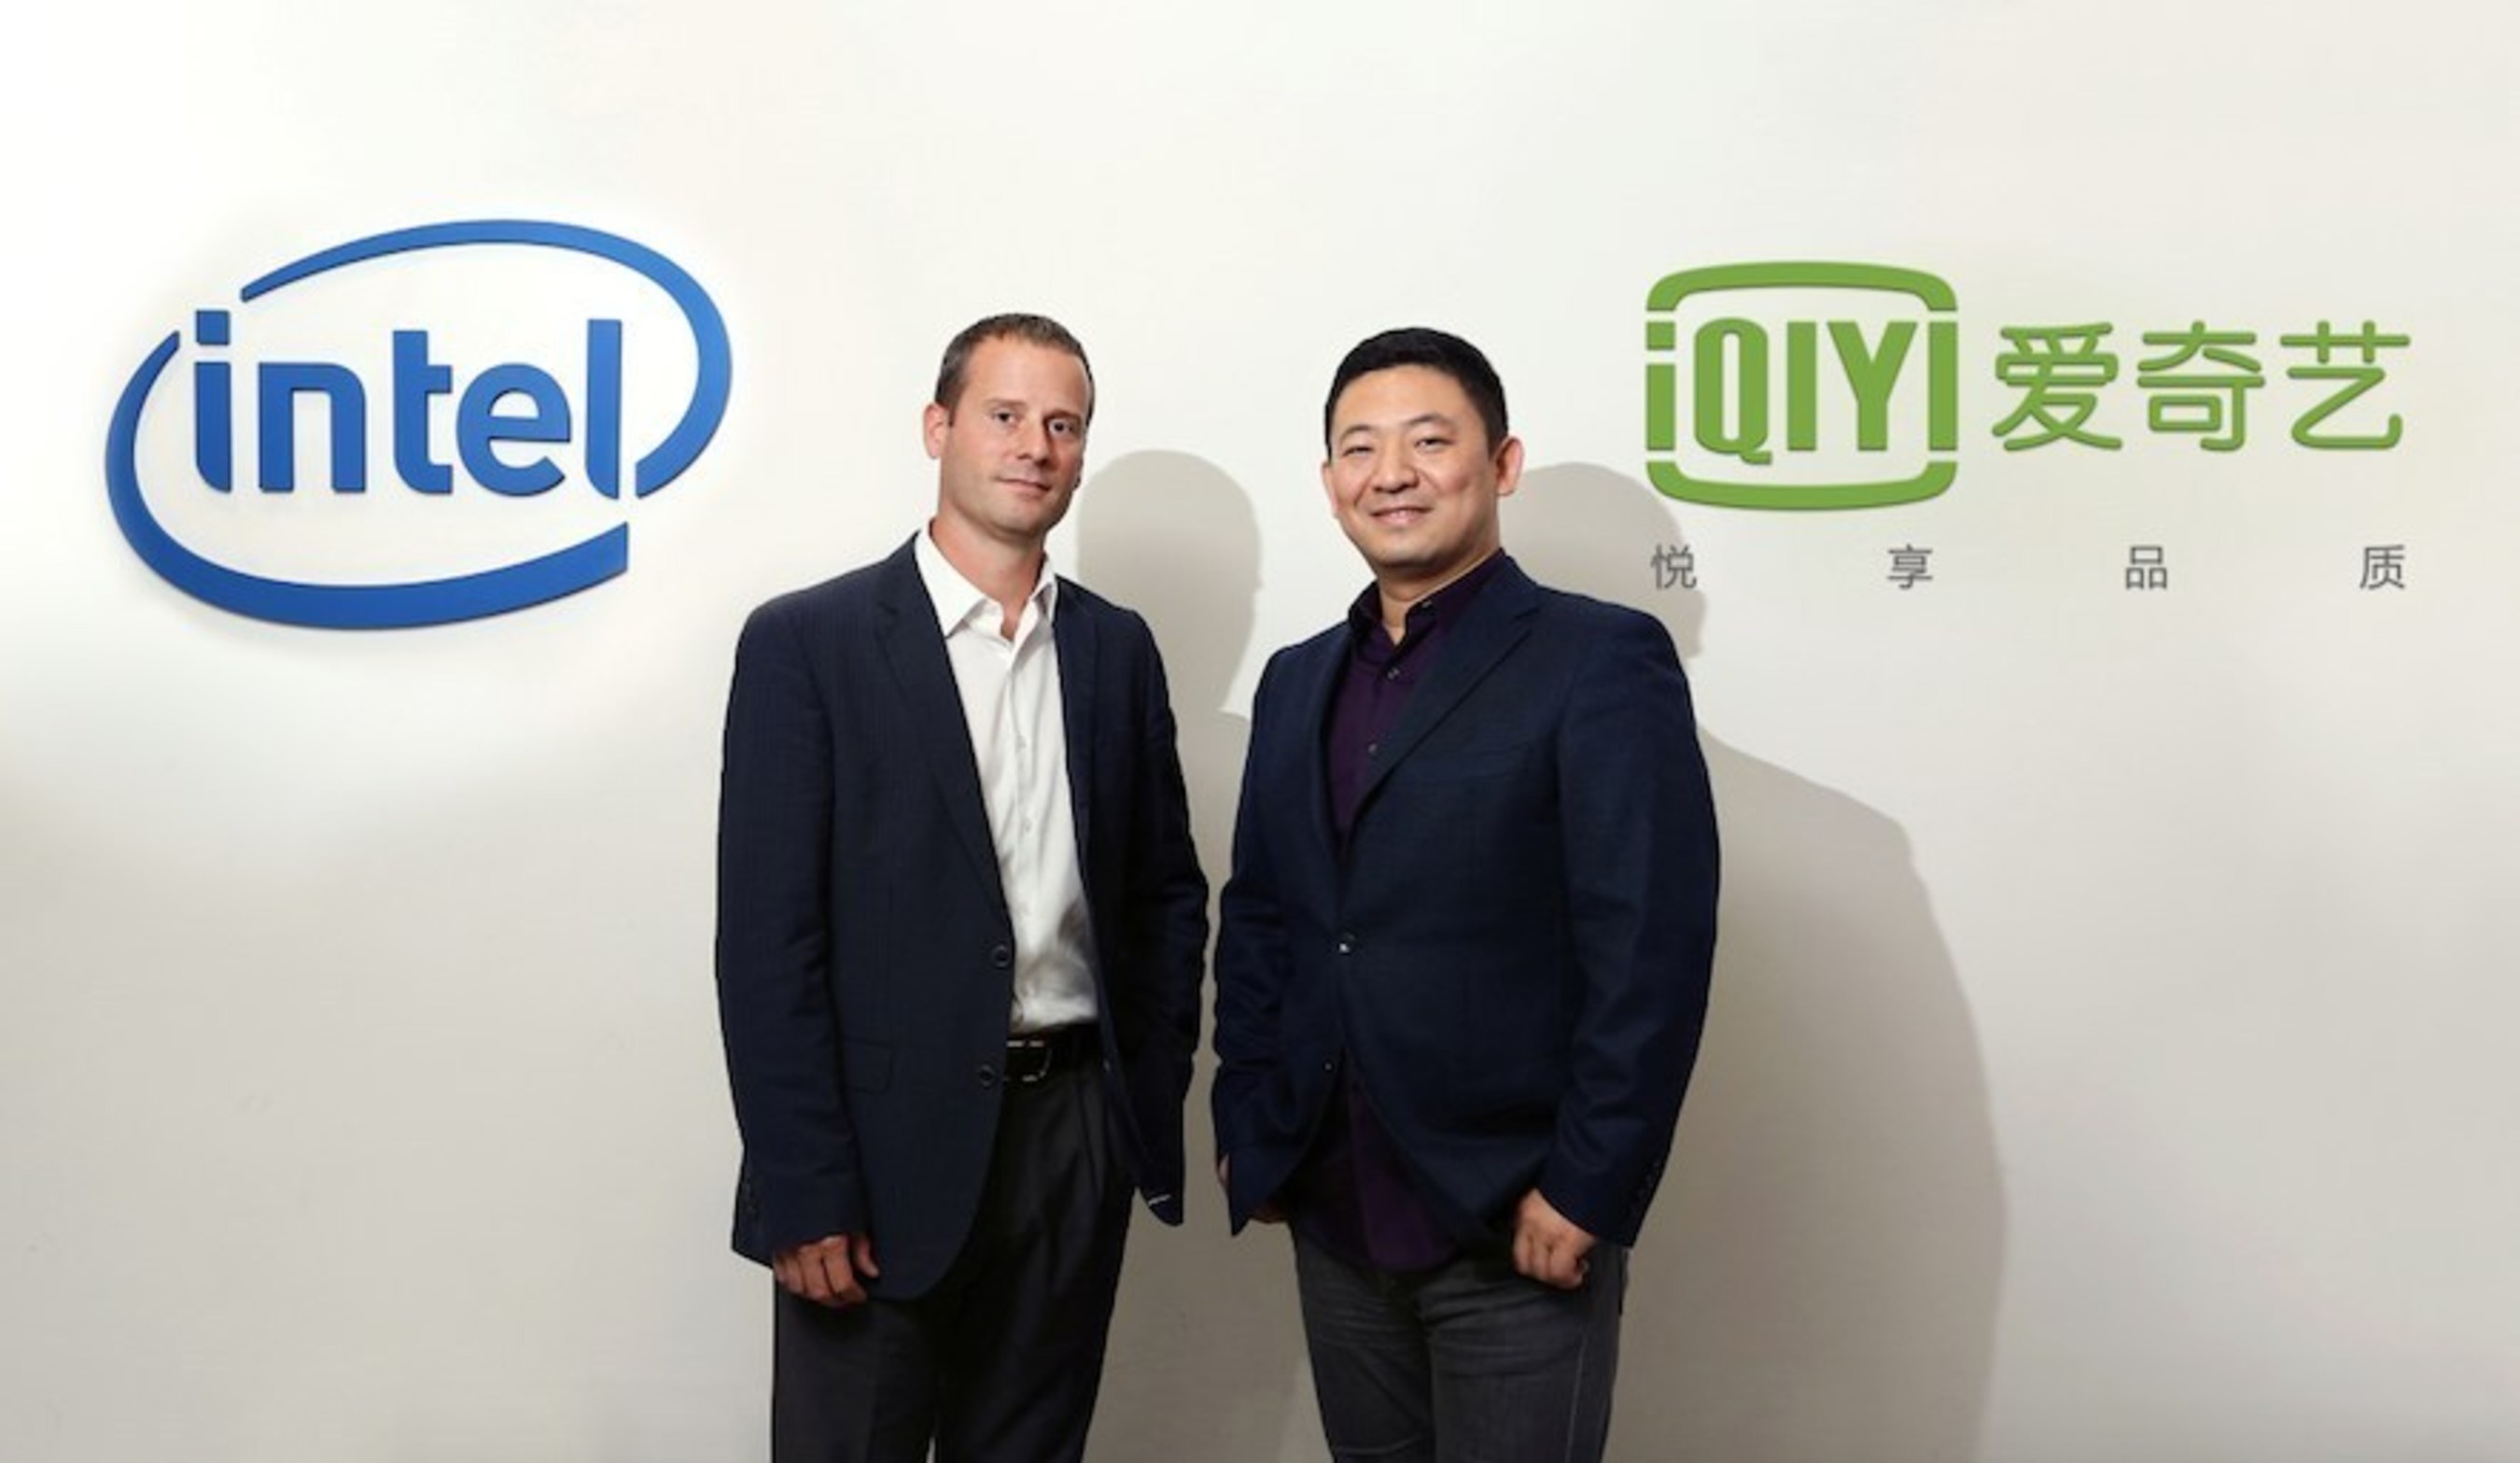 iQIYI’s Chief Technology Officer Mr. Xing Tang and Intel’s General Manager of Consumption Sales Mr. Douglas Cougle